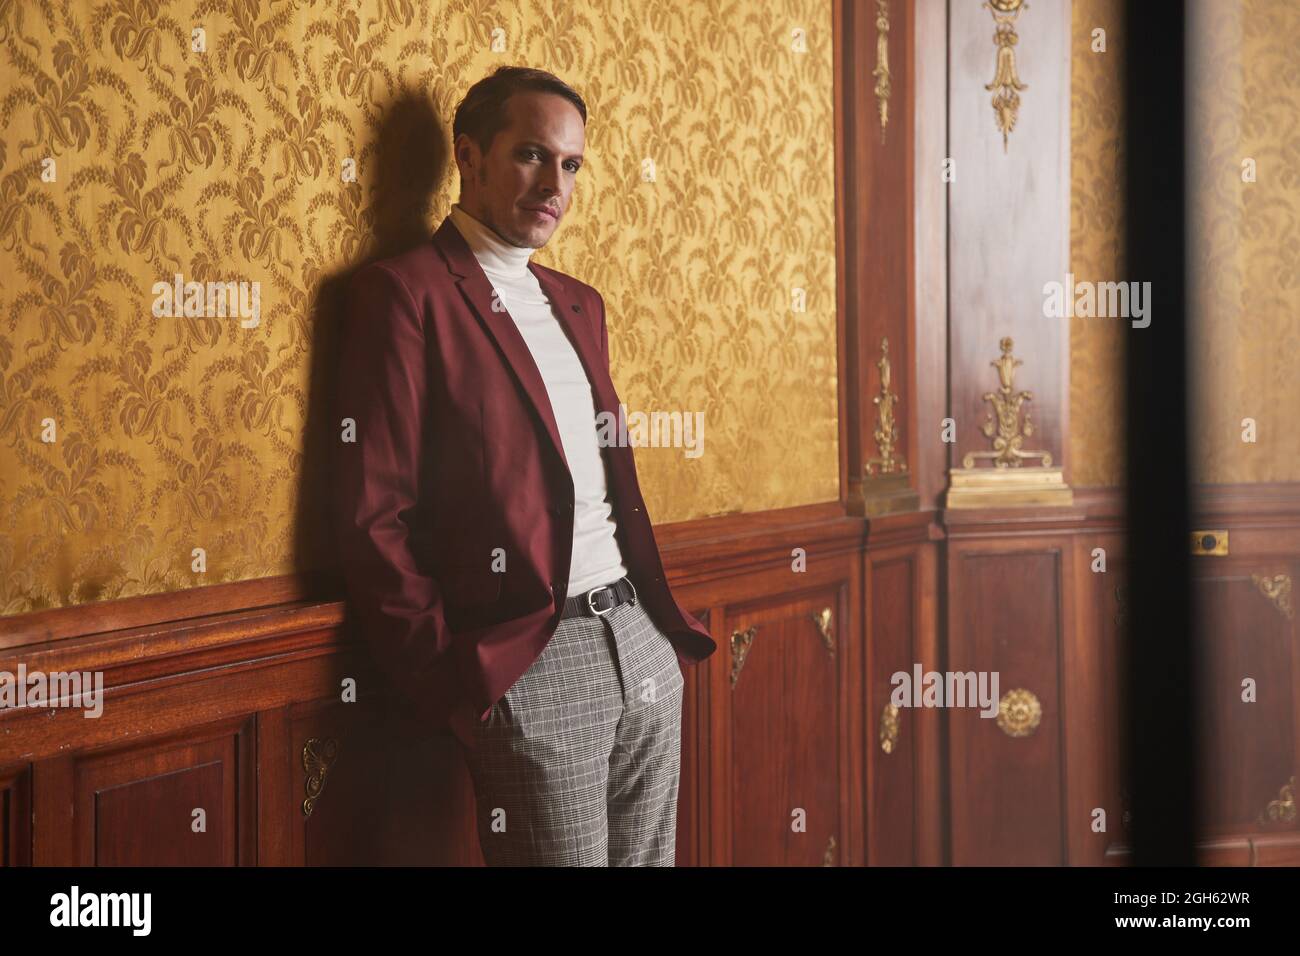 Confident adult male actor in elegant classy clothes keeping hand in pocket and looking away thoughtfully while standing near wall in vintage style ro Stock Photo